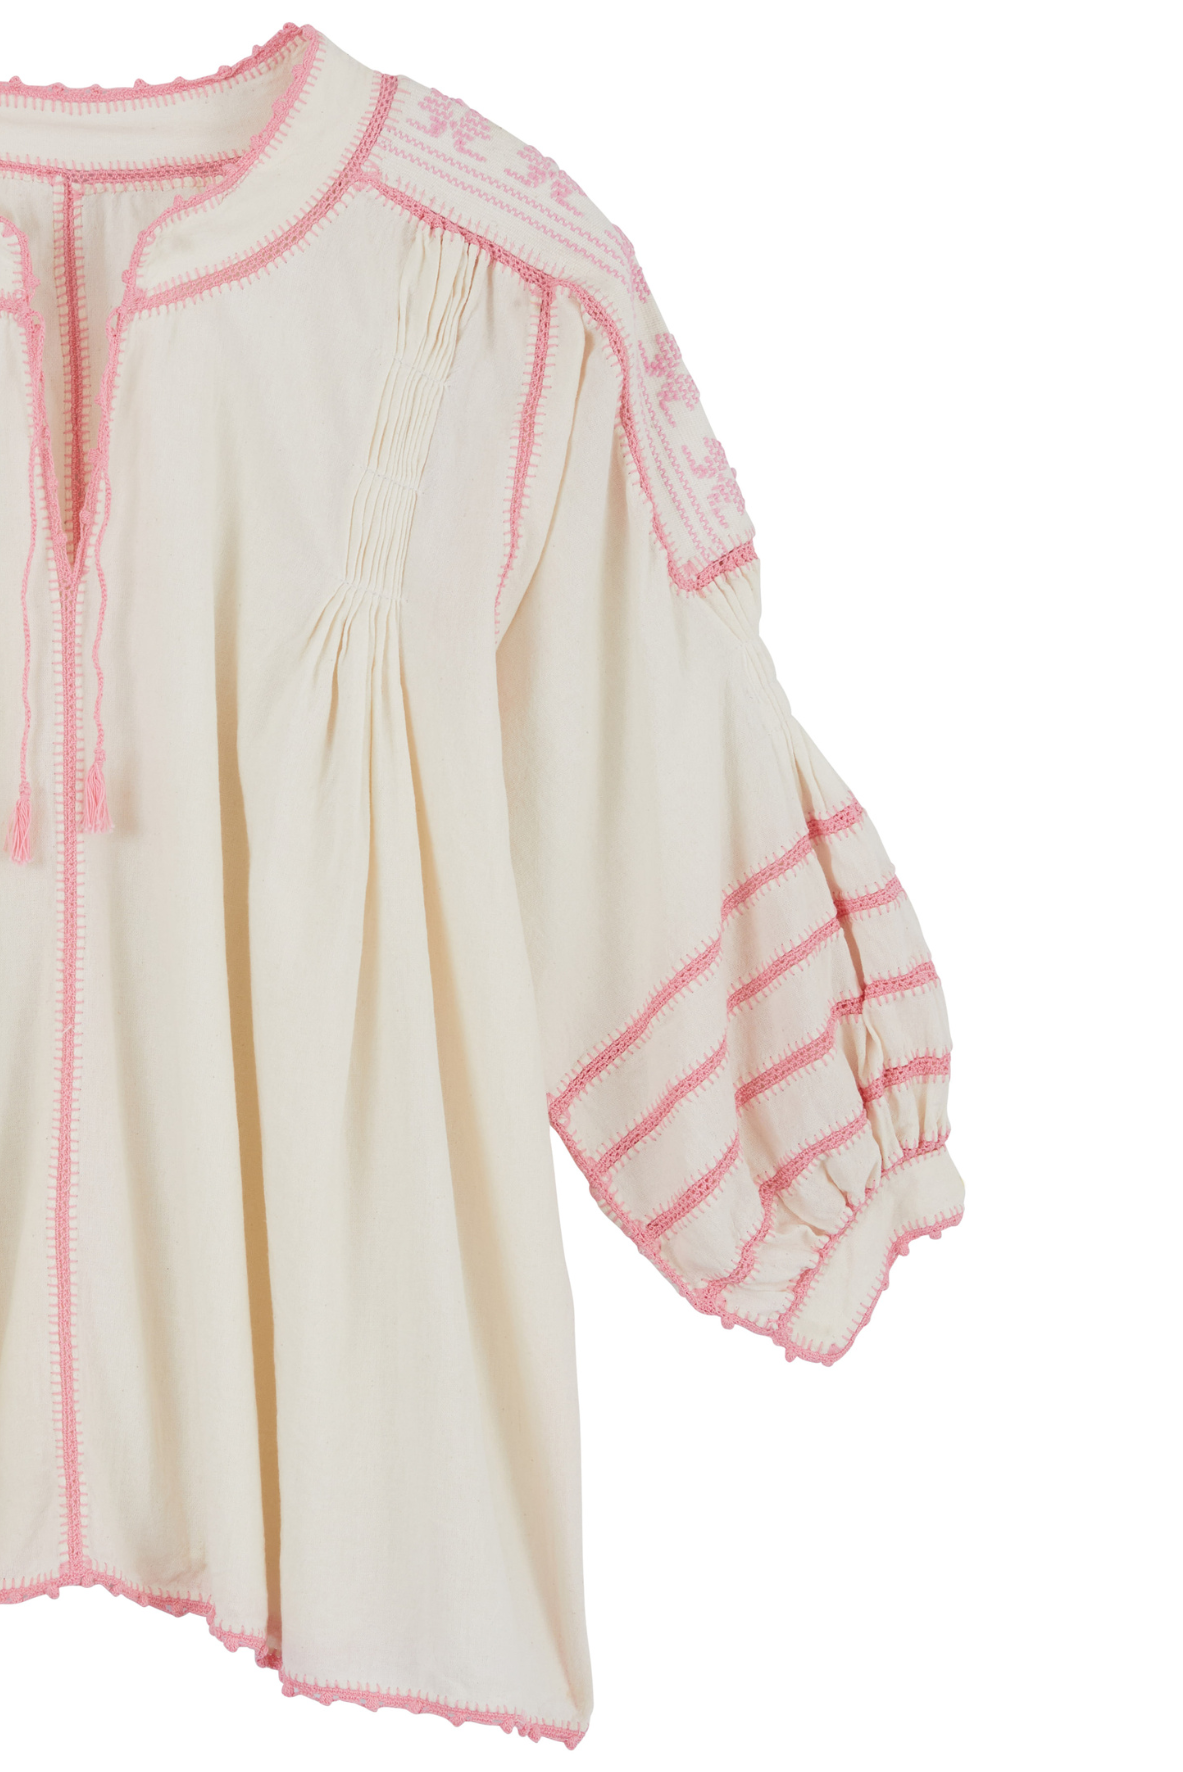 Amorcita Mexican Top - Ivory, Pink by Larkin Lane